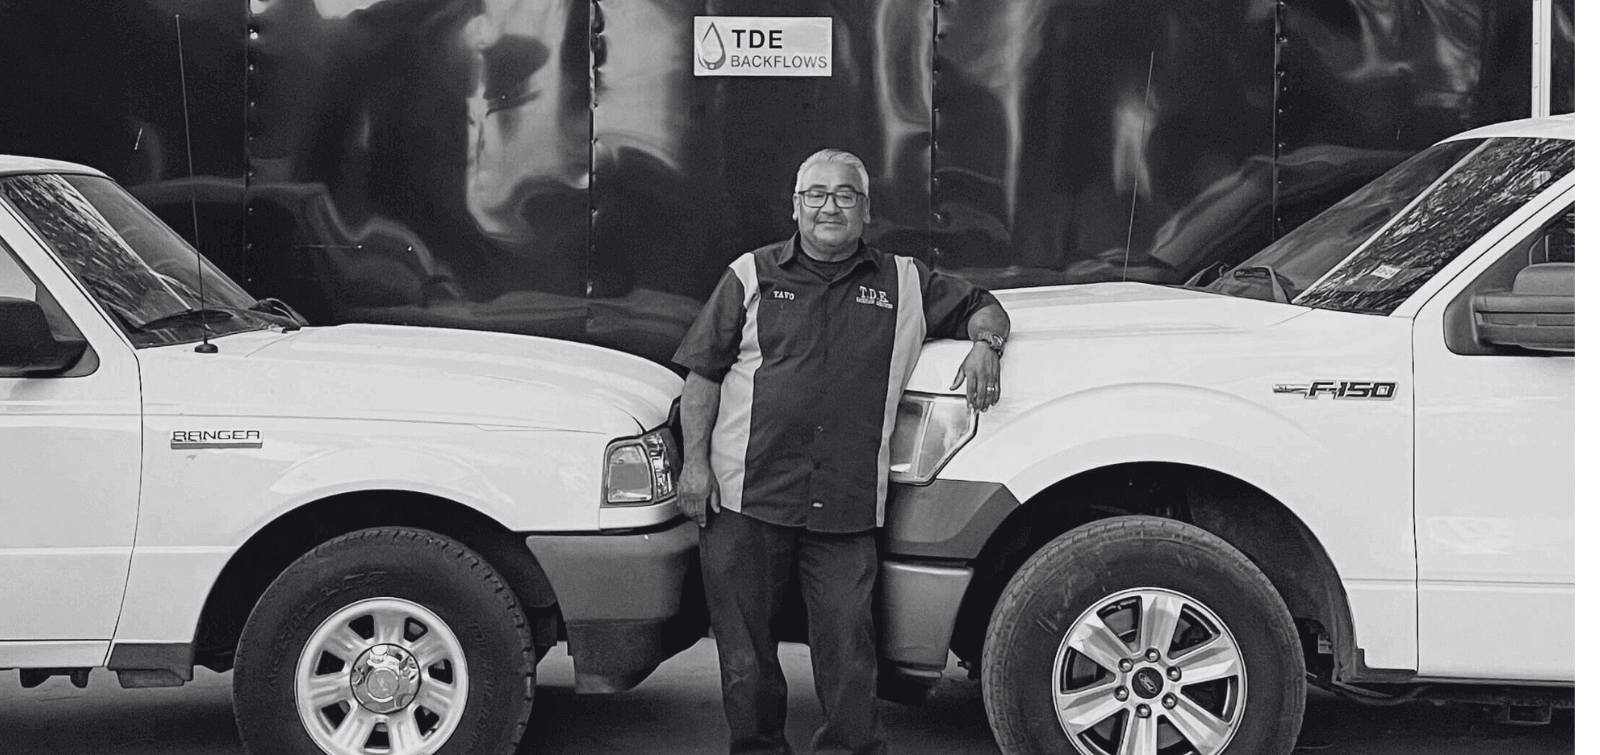 TDE owner poses with two of his work trucks